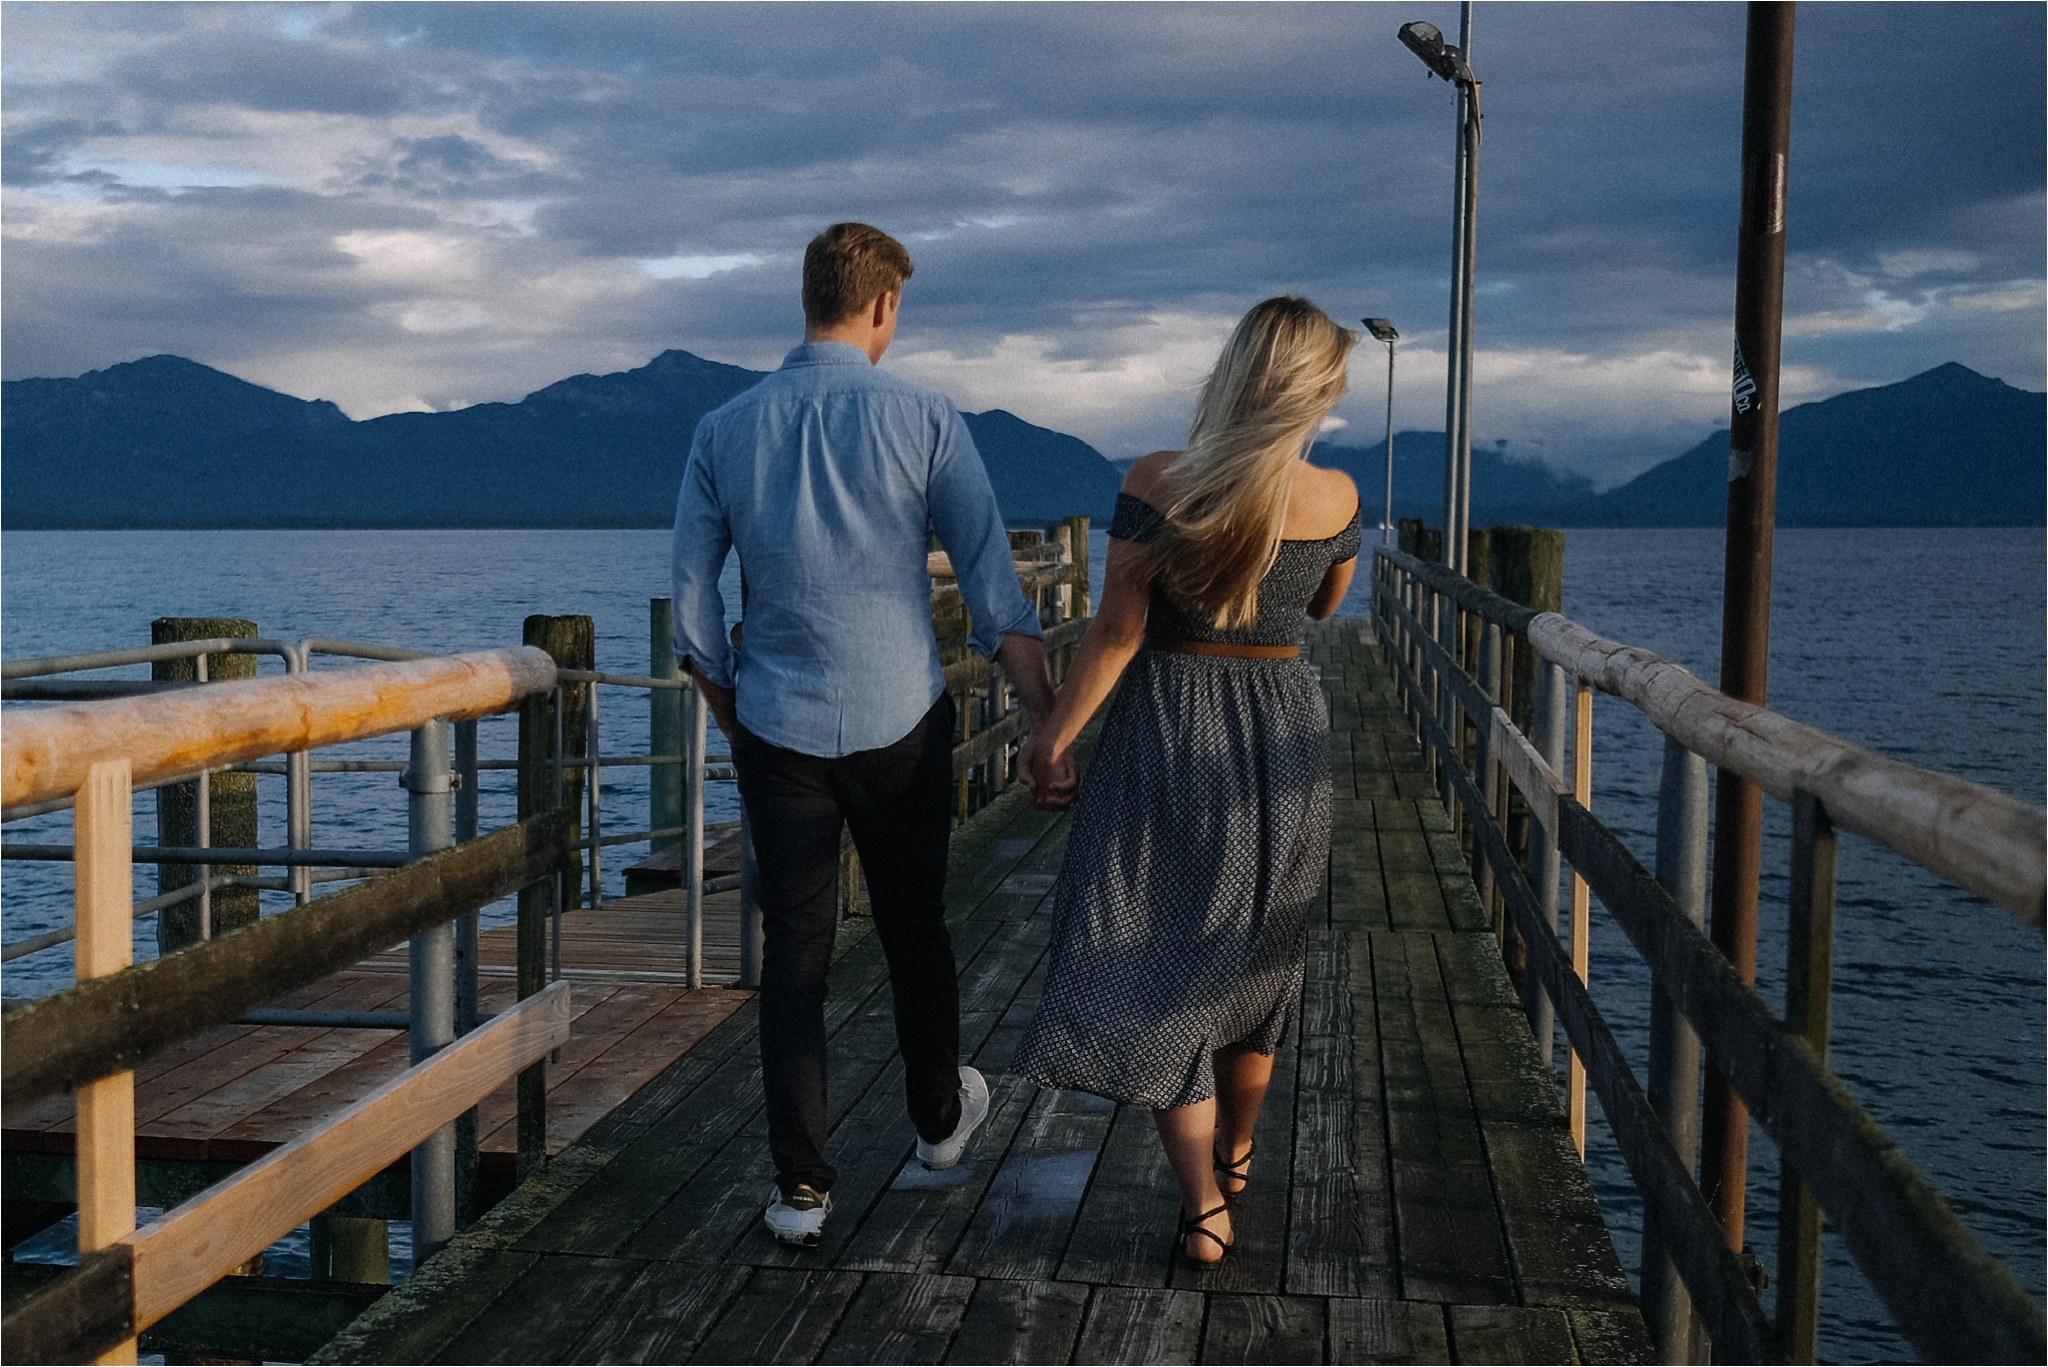 Engagement Photography at Chiemsee